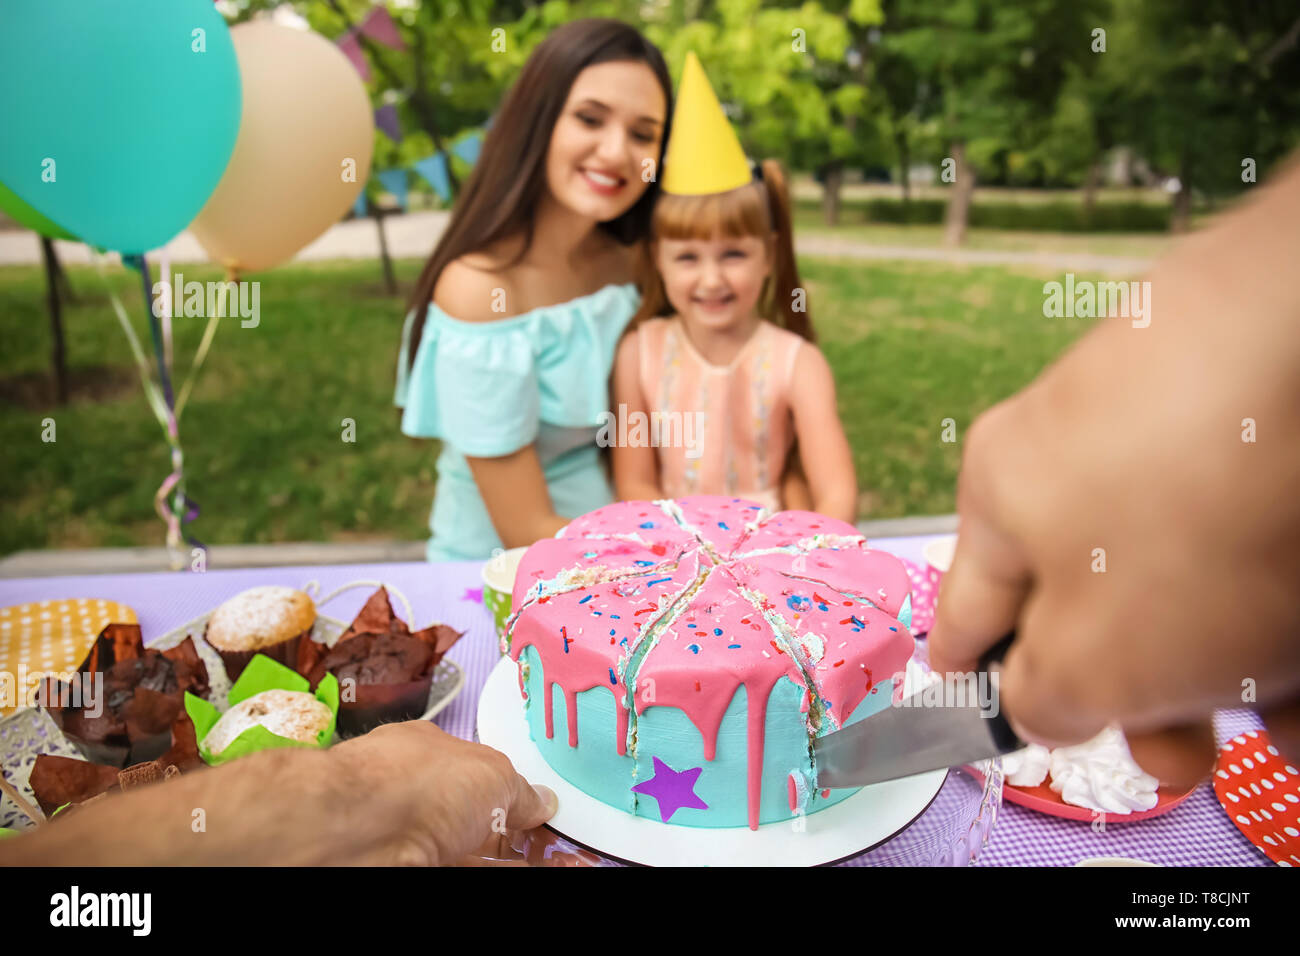 Father cutting tasty cake at birthday party outdoors Stock Photo